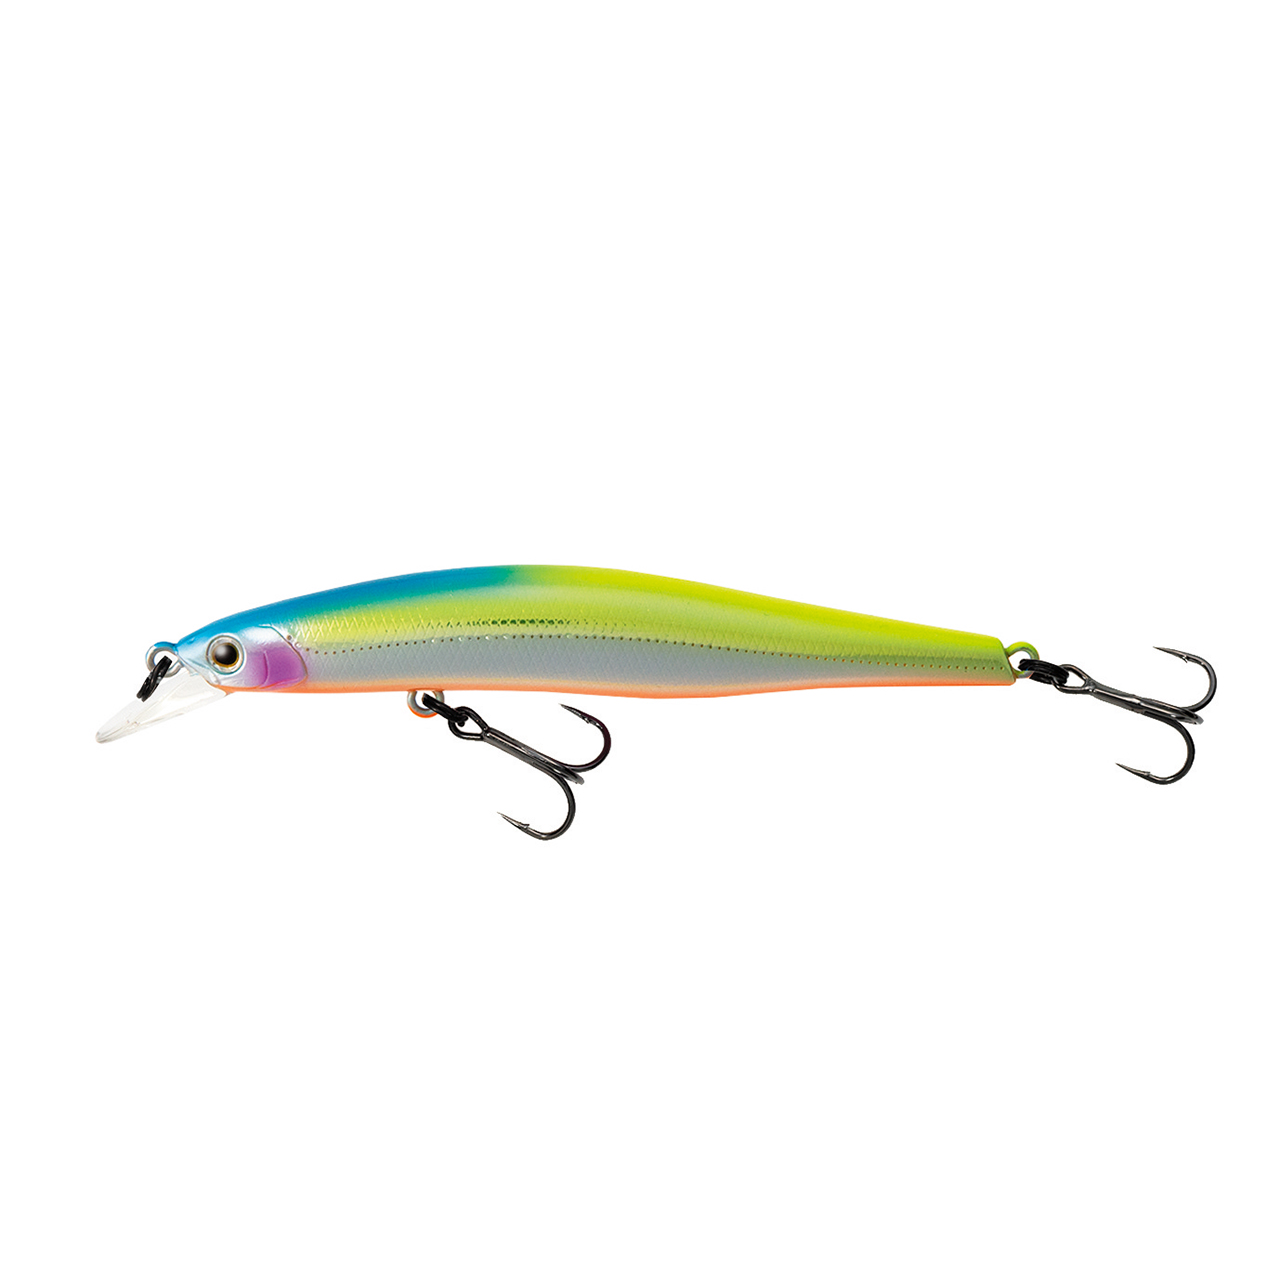 Details about   Tiemco Sumari 95F Minnow Floating Lure 060 6780 